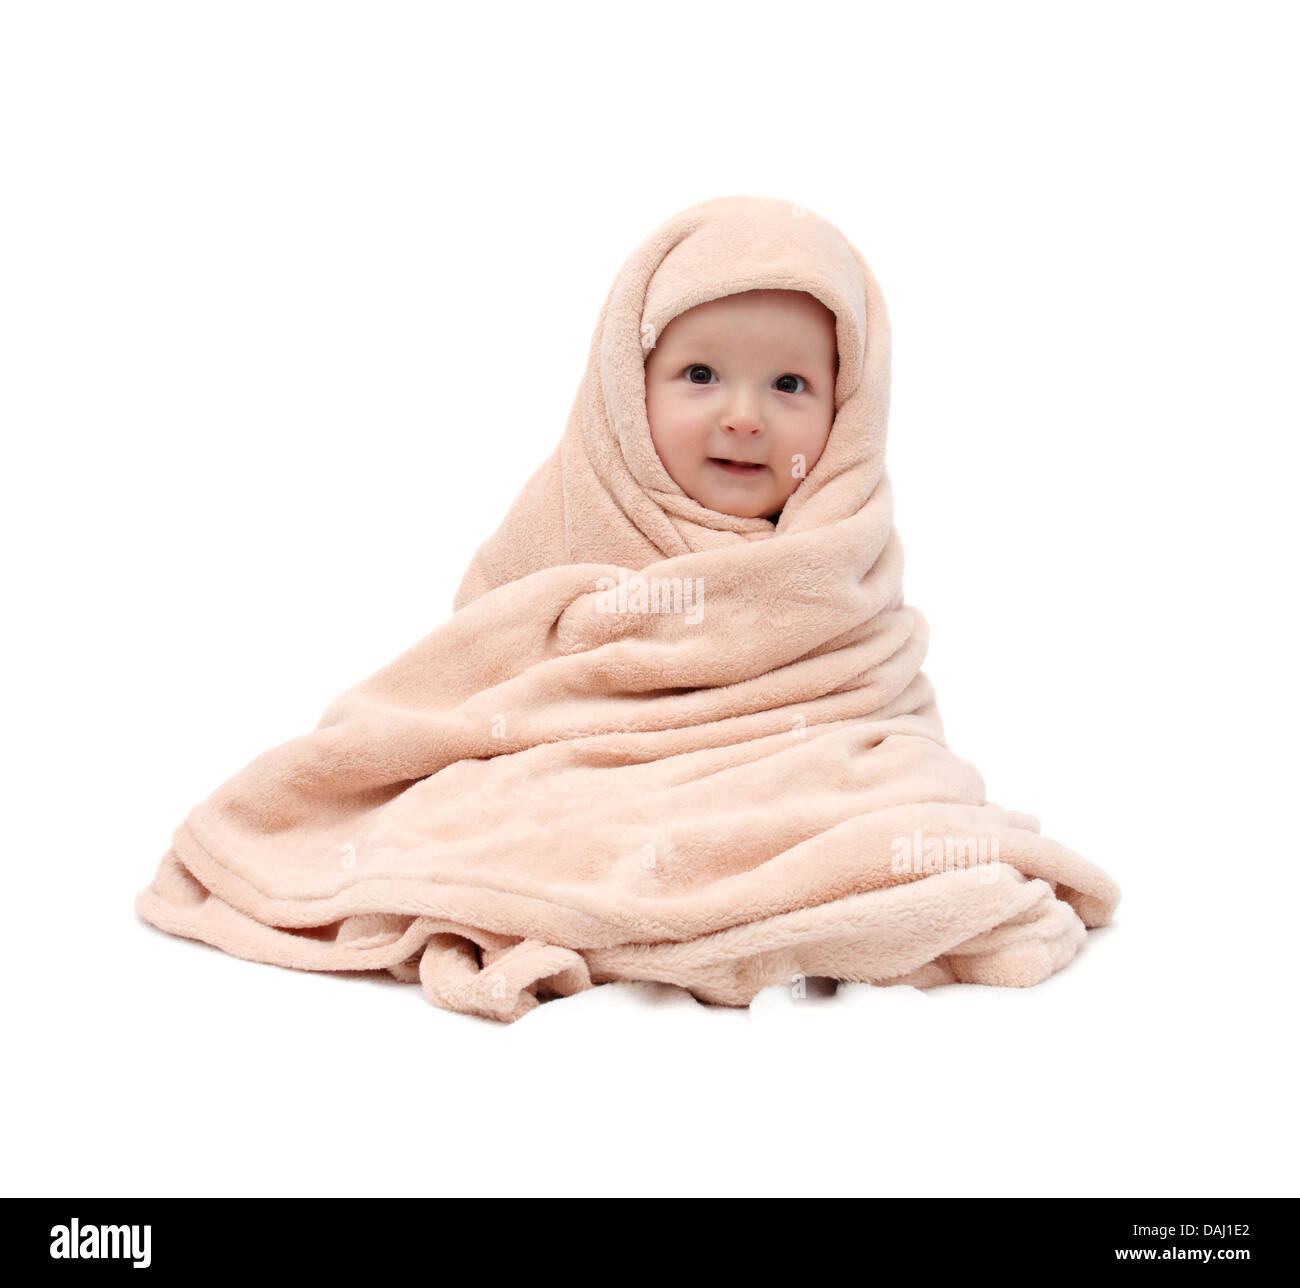 baby after bath sitting on bed Stock Photo